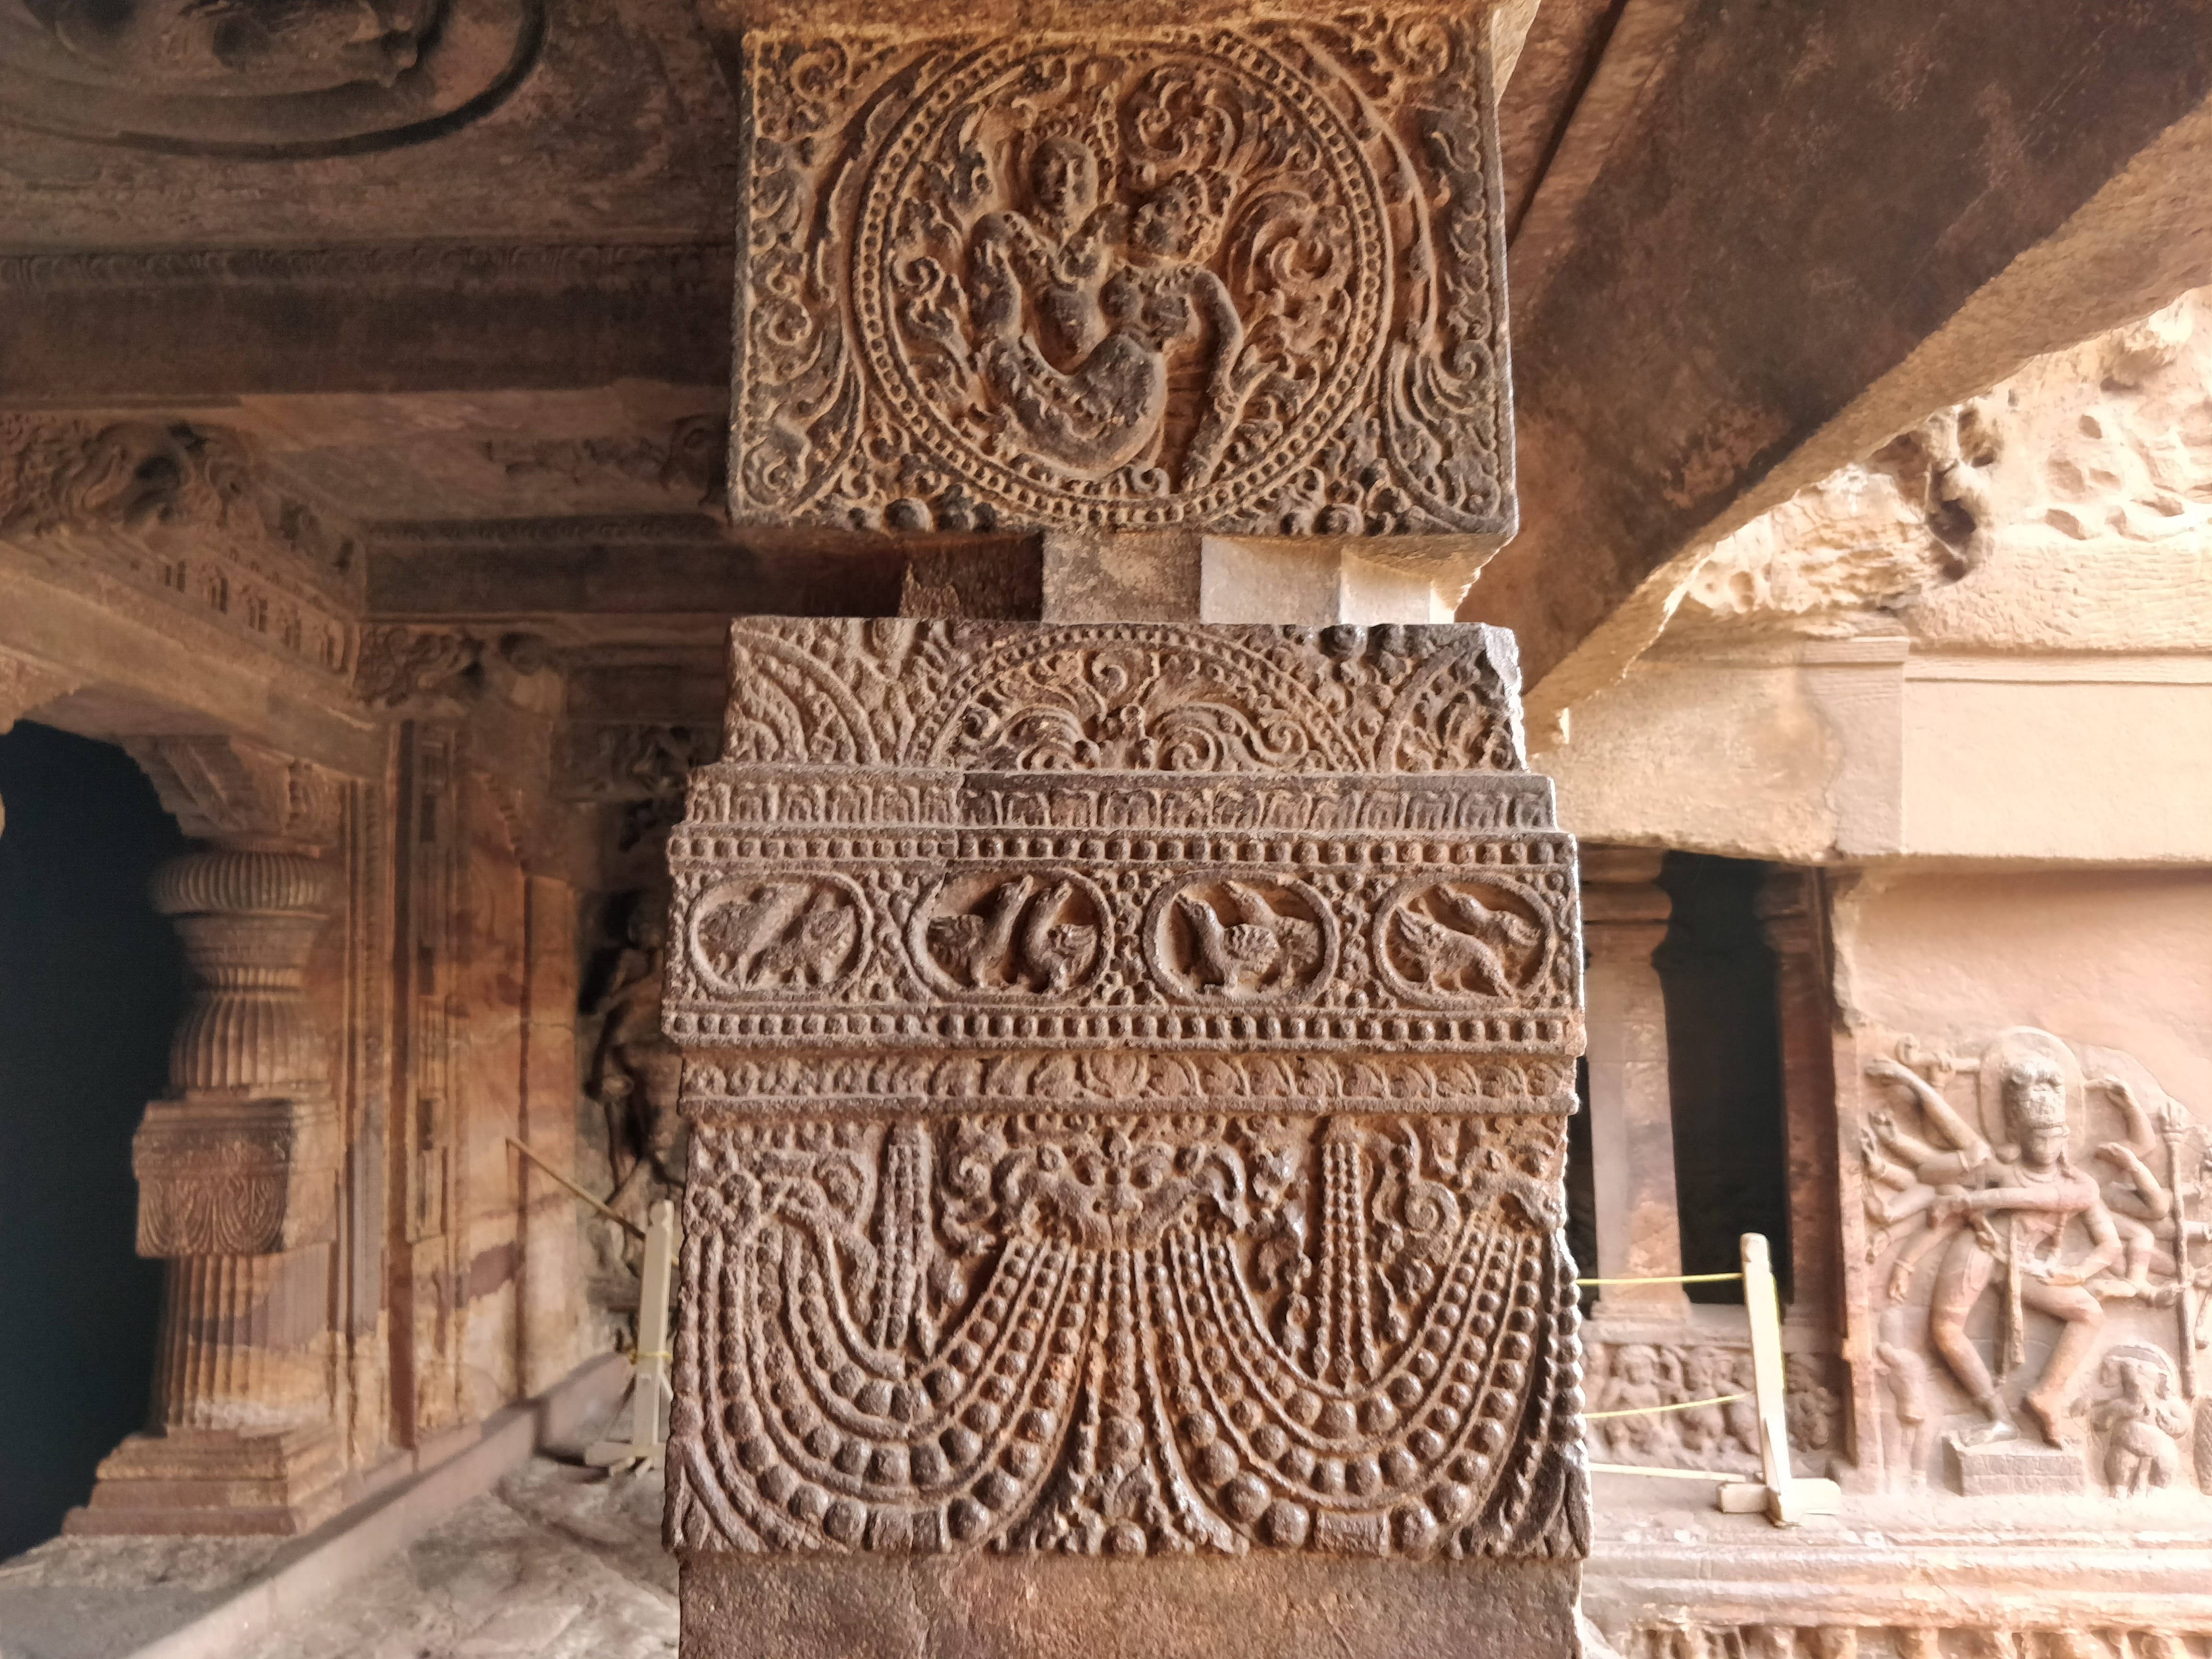 carvings on the pillars